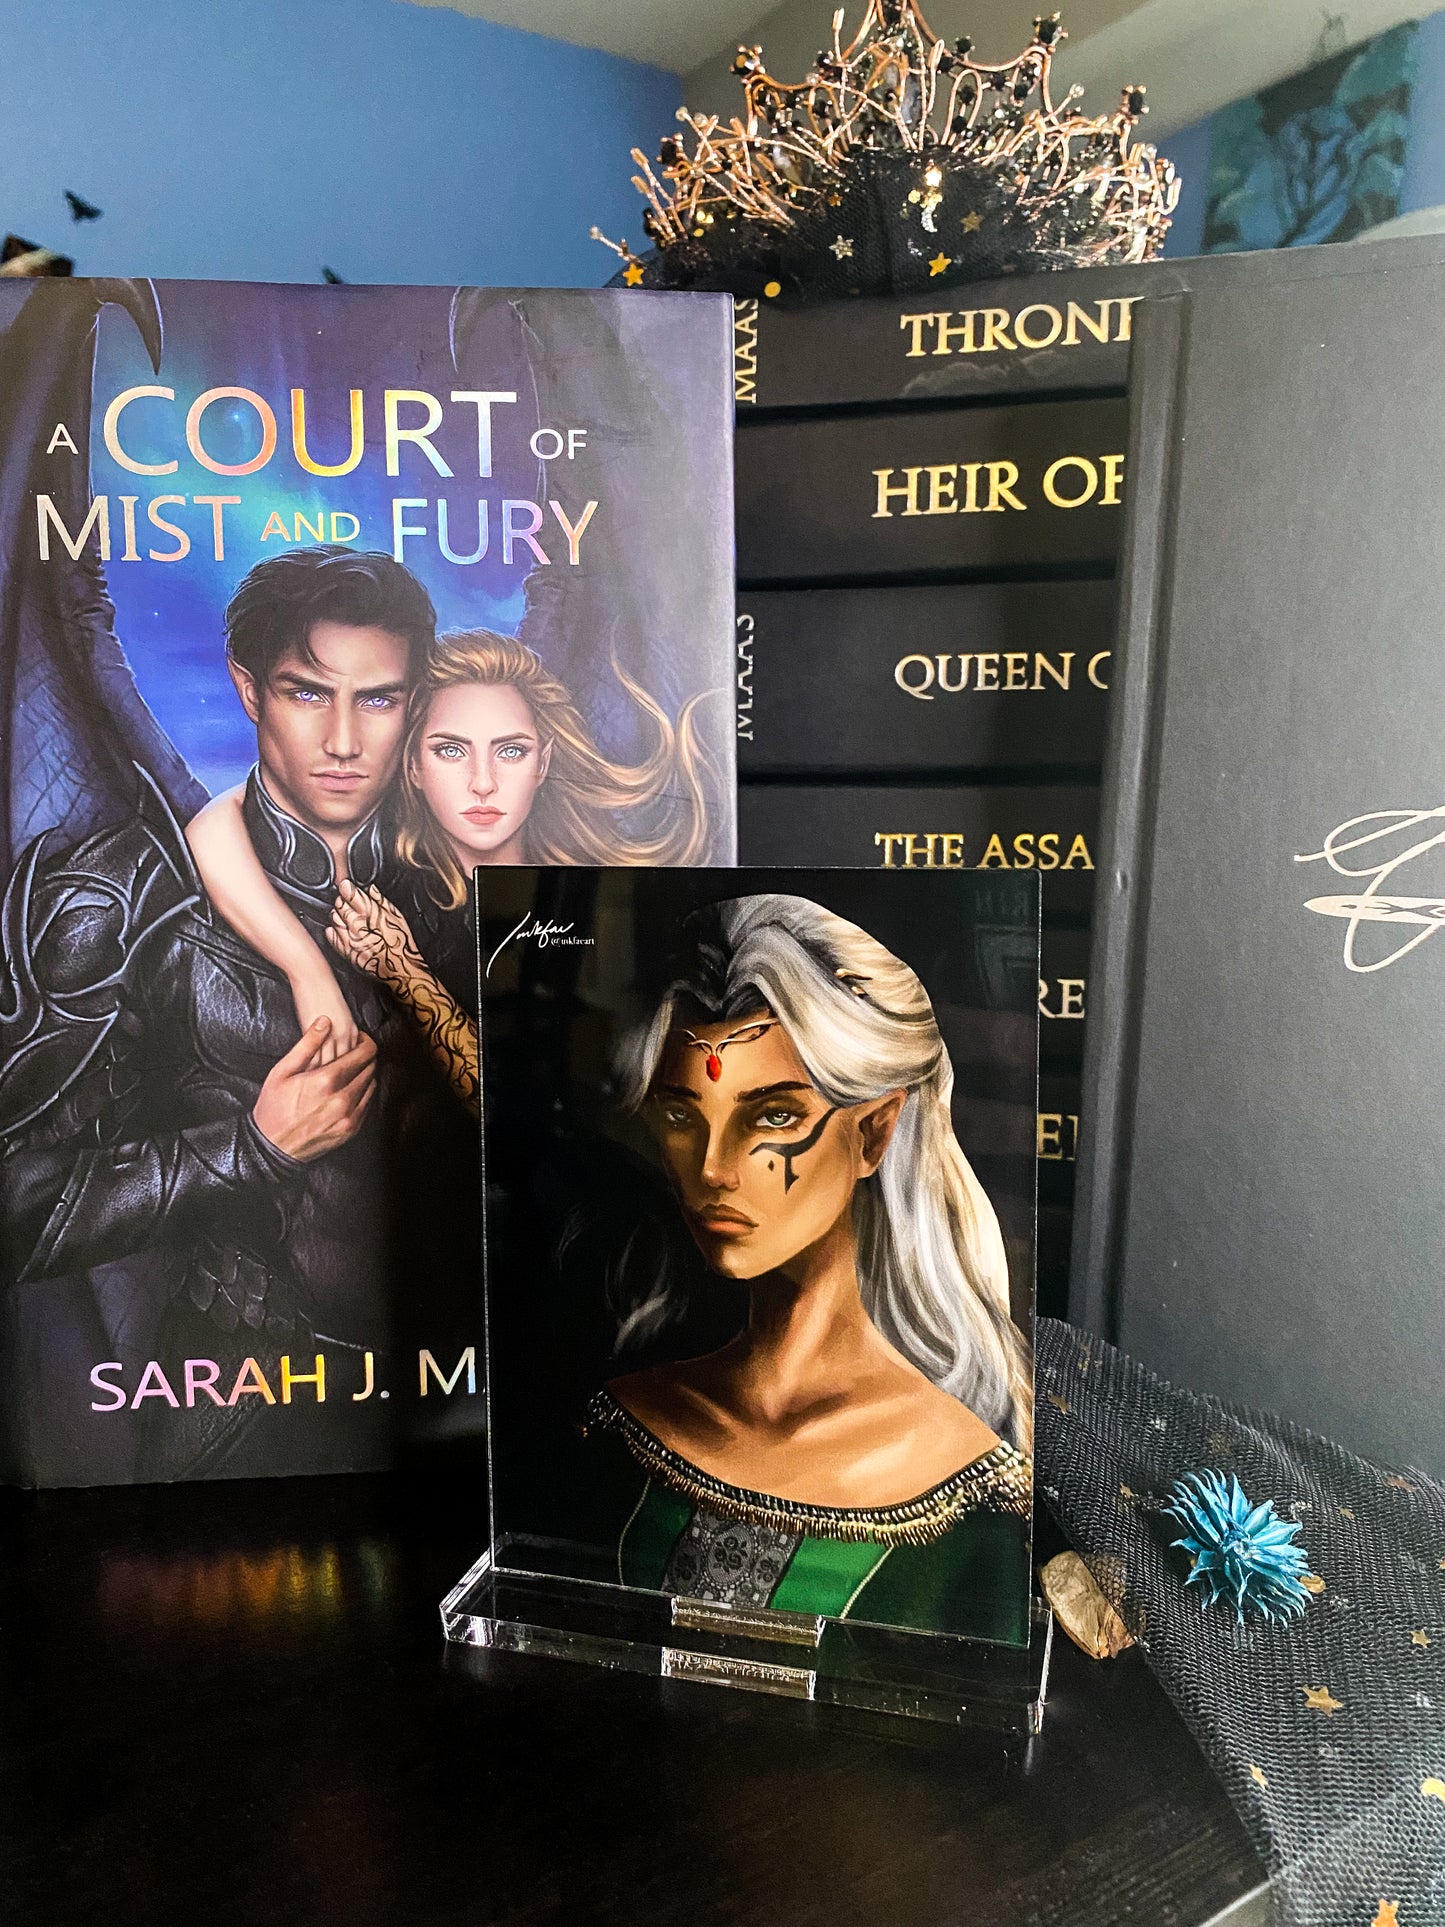 Heir of Snow and Fire - Fan Art from @InkFaeArt - Freestanding Bookshelf / Desktop Acrylic Accessory - Officially licensed by Sarah J. Maas - FA3